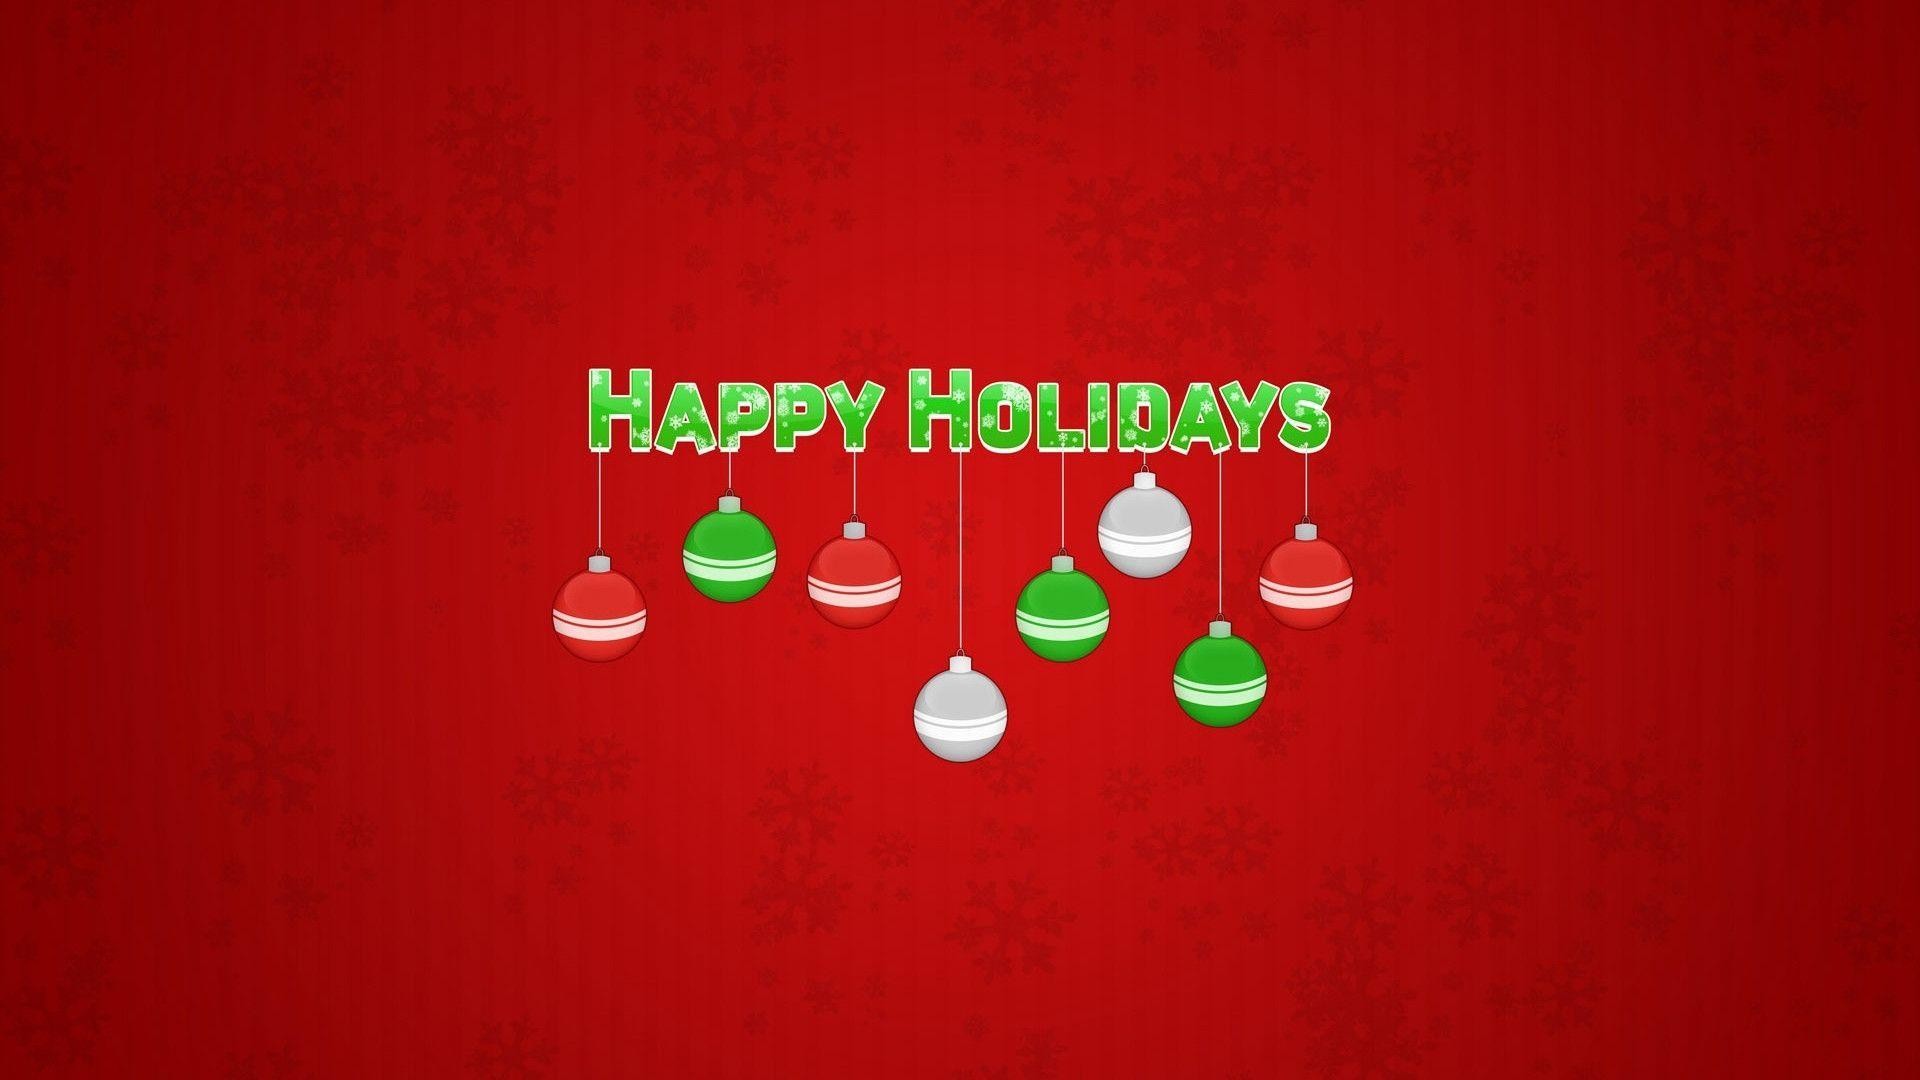 1920x1080 Happy Holidays Background Wallpaper